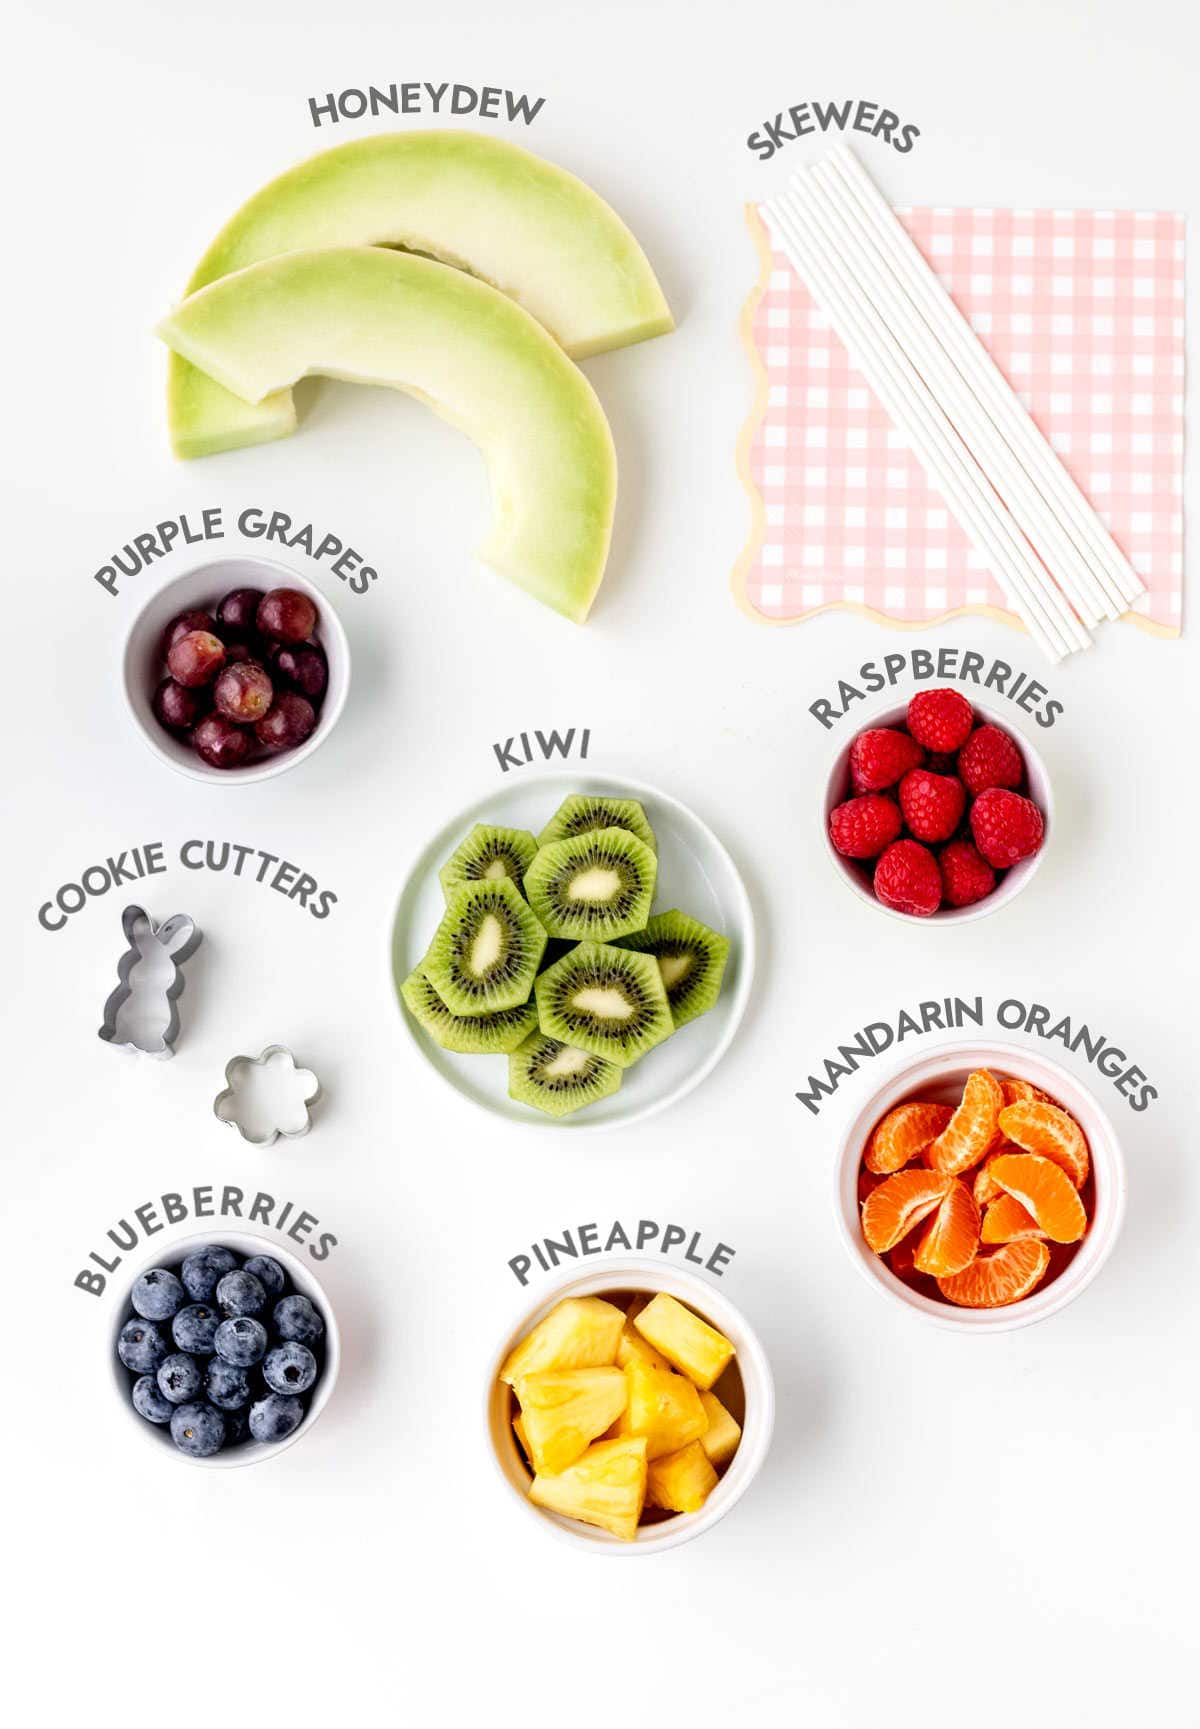 Individually portioned ingredients for the Easter fruit kabobs with text displaying what each one is.